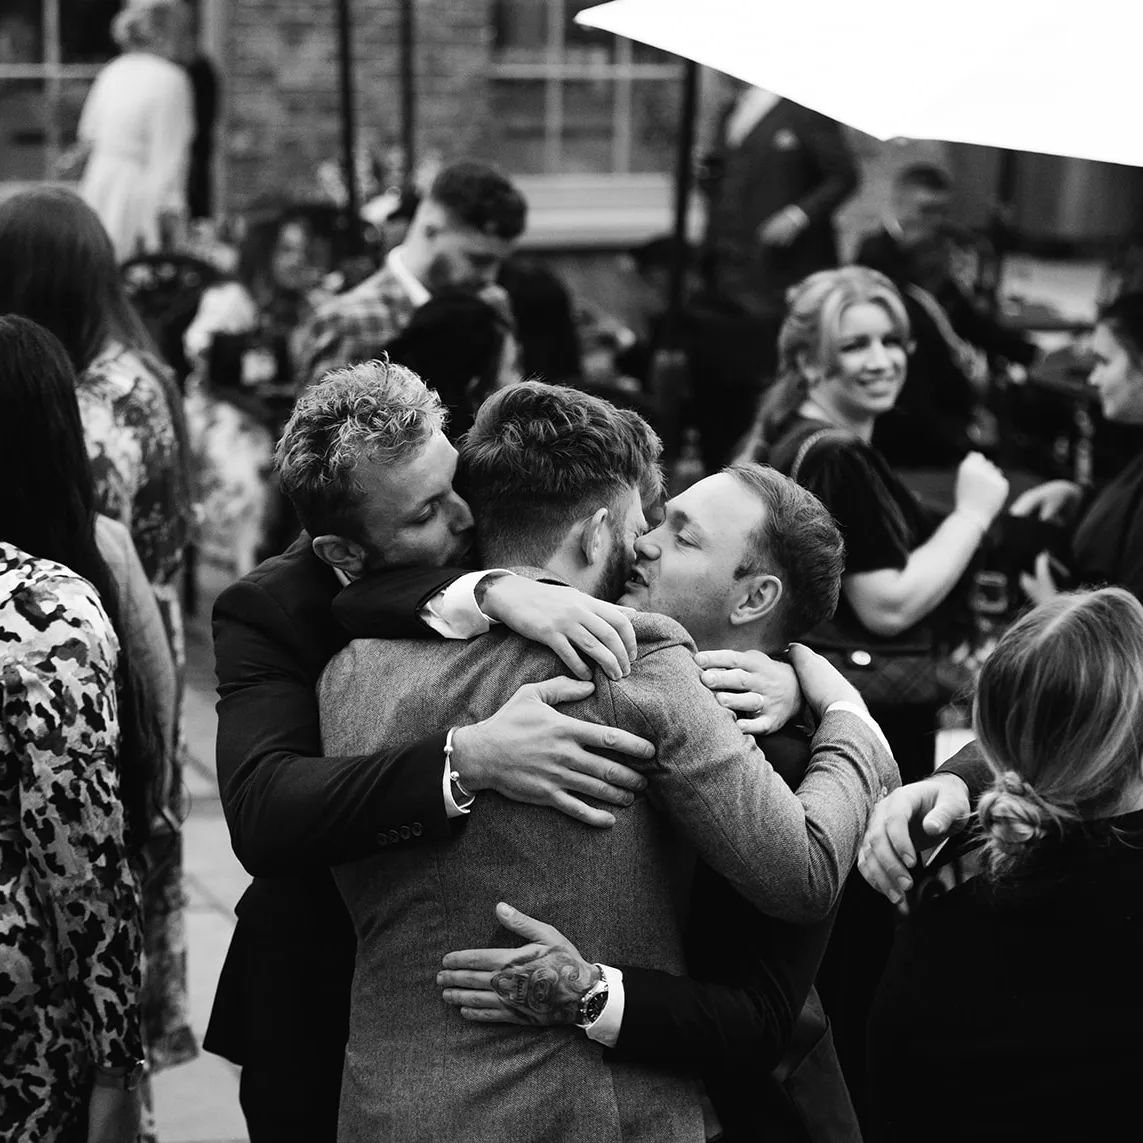 Connections at weddings are SO important. I always strive to capture all those fleeting moments where you're being embraced by those you love the most 🖤
My favourite part of most weddings is the time just after the ceremony, when your guests are sho